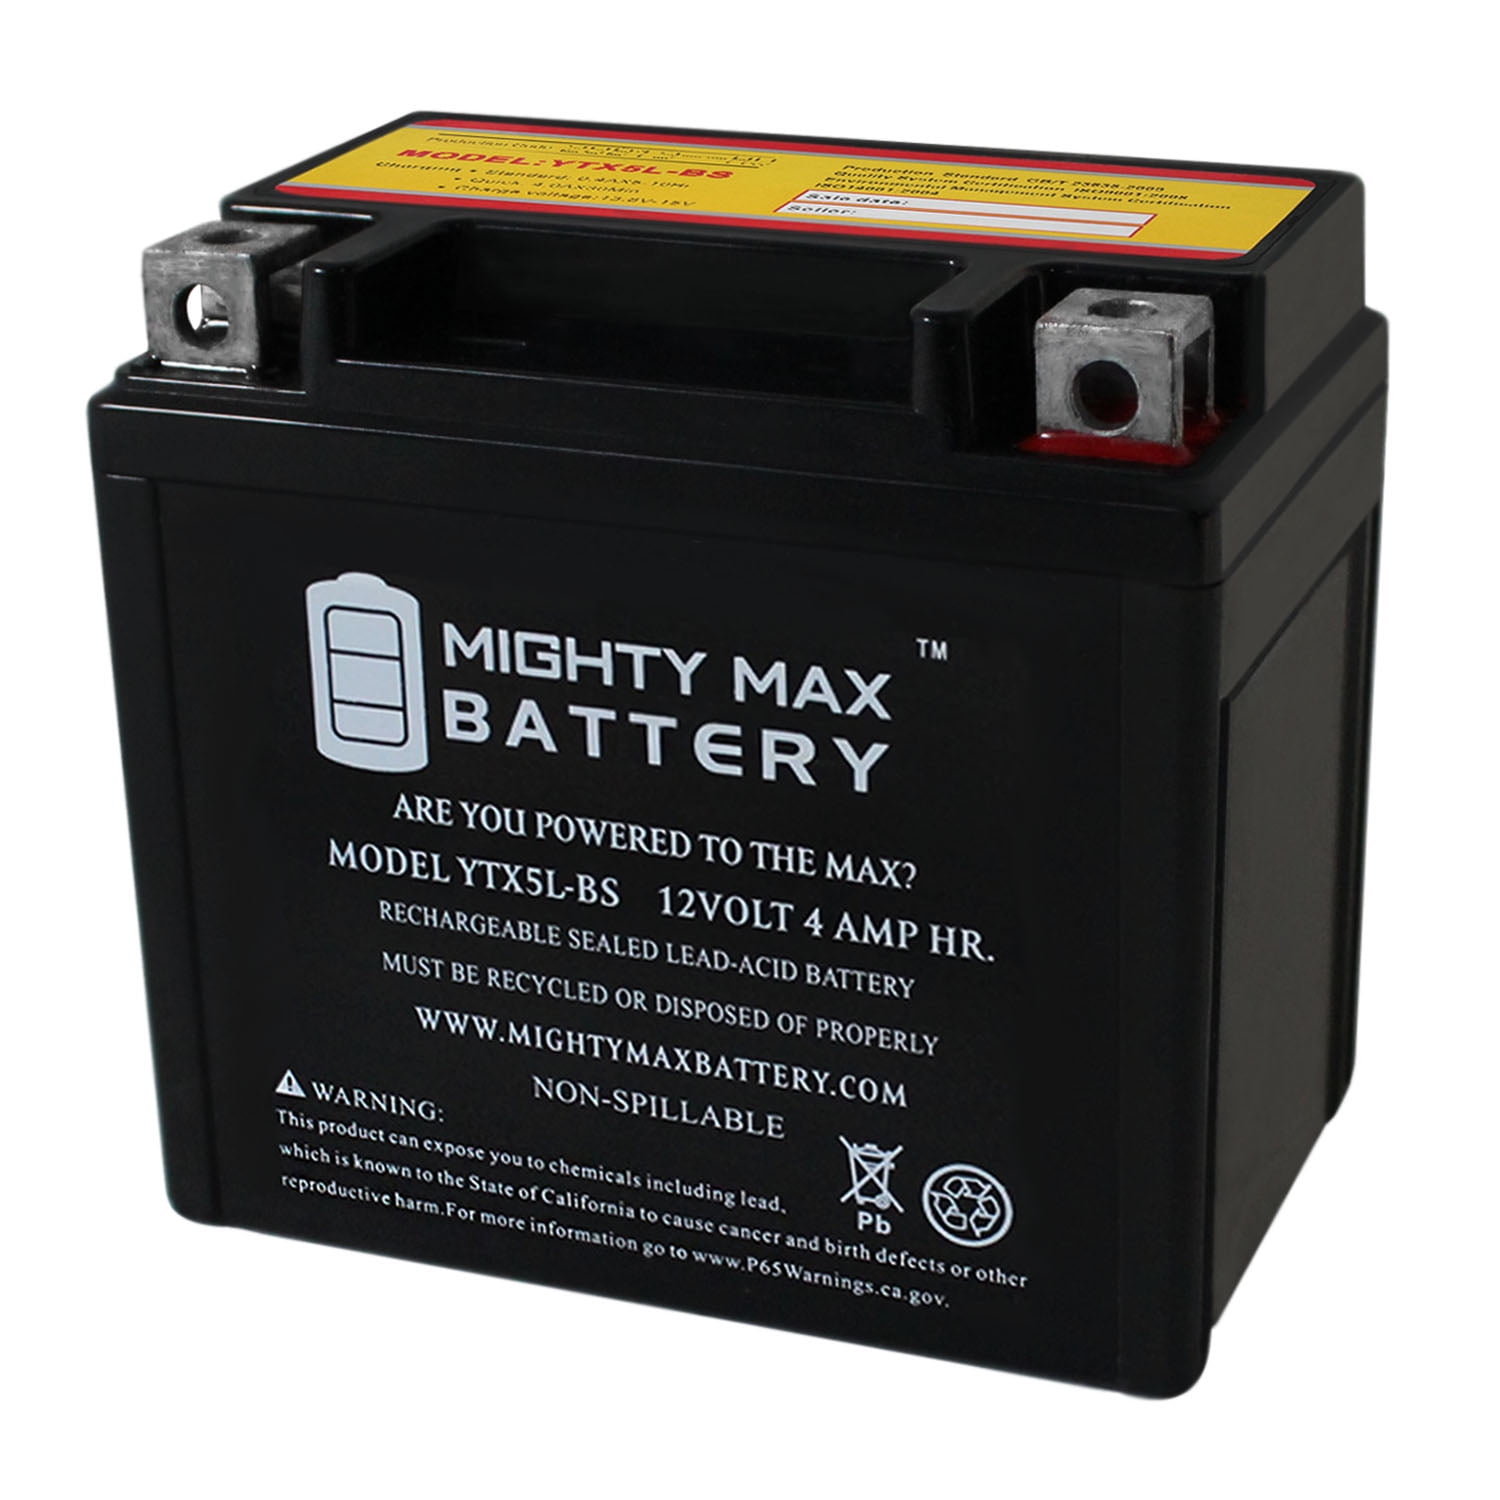 Mighty Max Battery 12V 10AH SLA Battery Replacement for ONEAC ONEXBC 4 Pack Brand Product